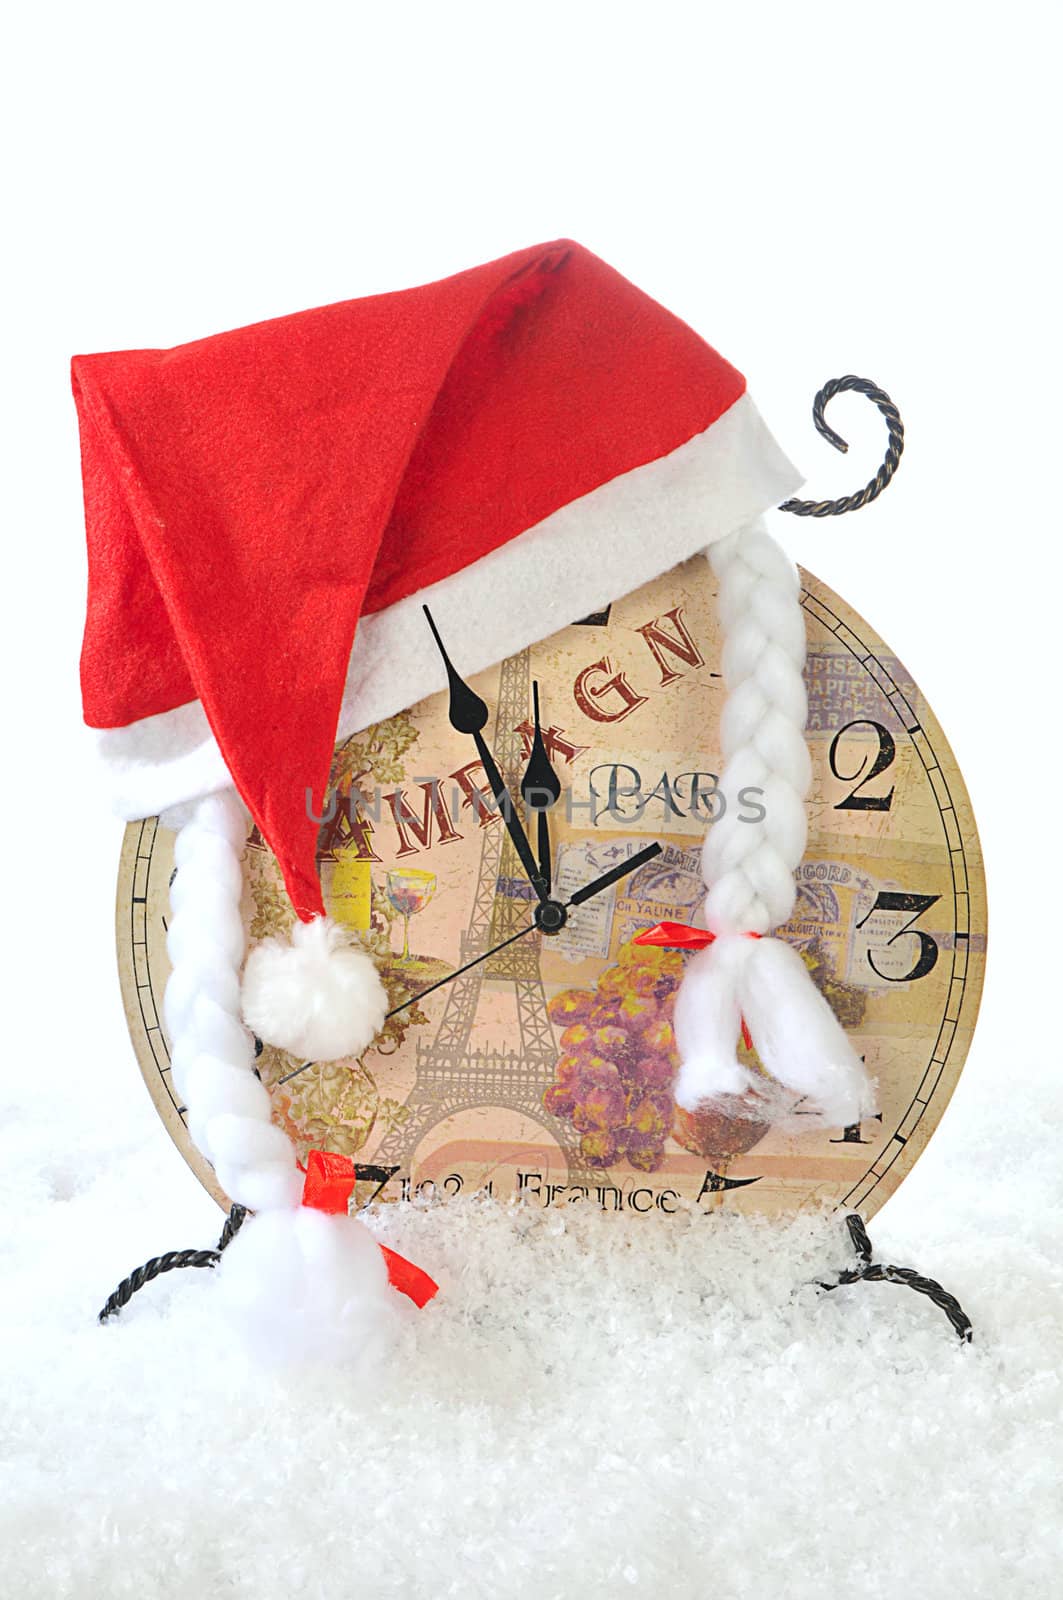 Clock in the hat of Santa Claus on a white snow background